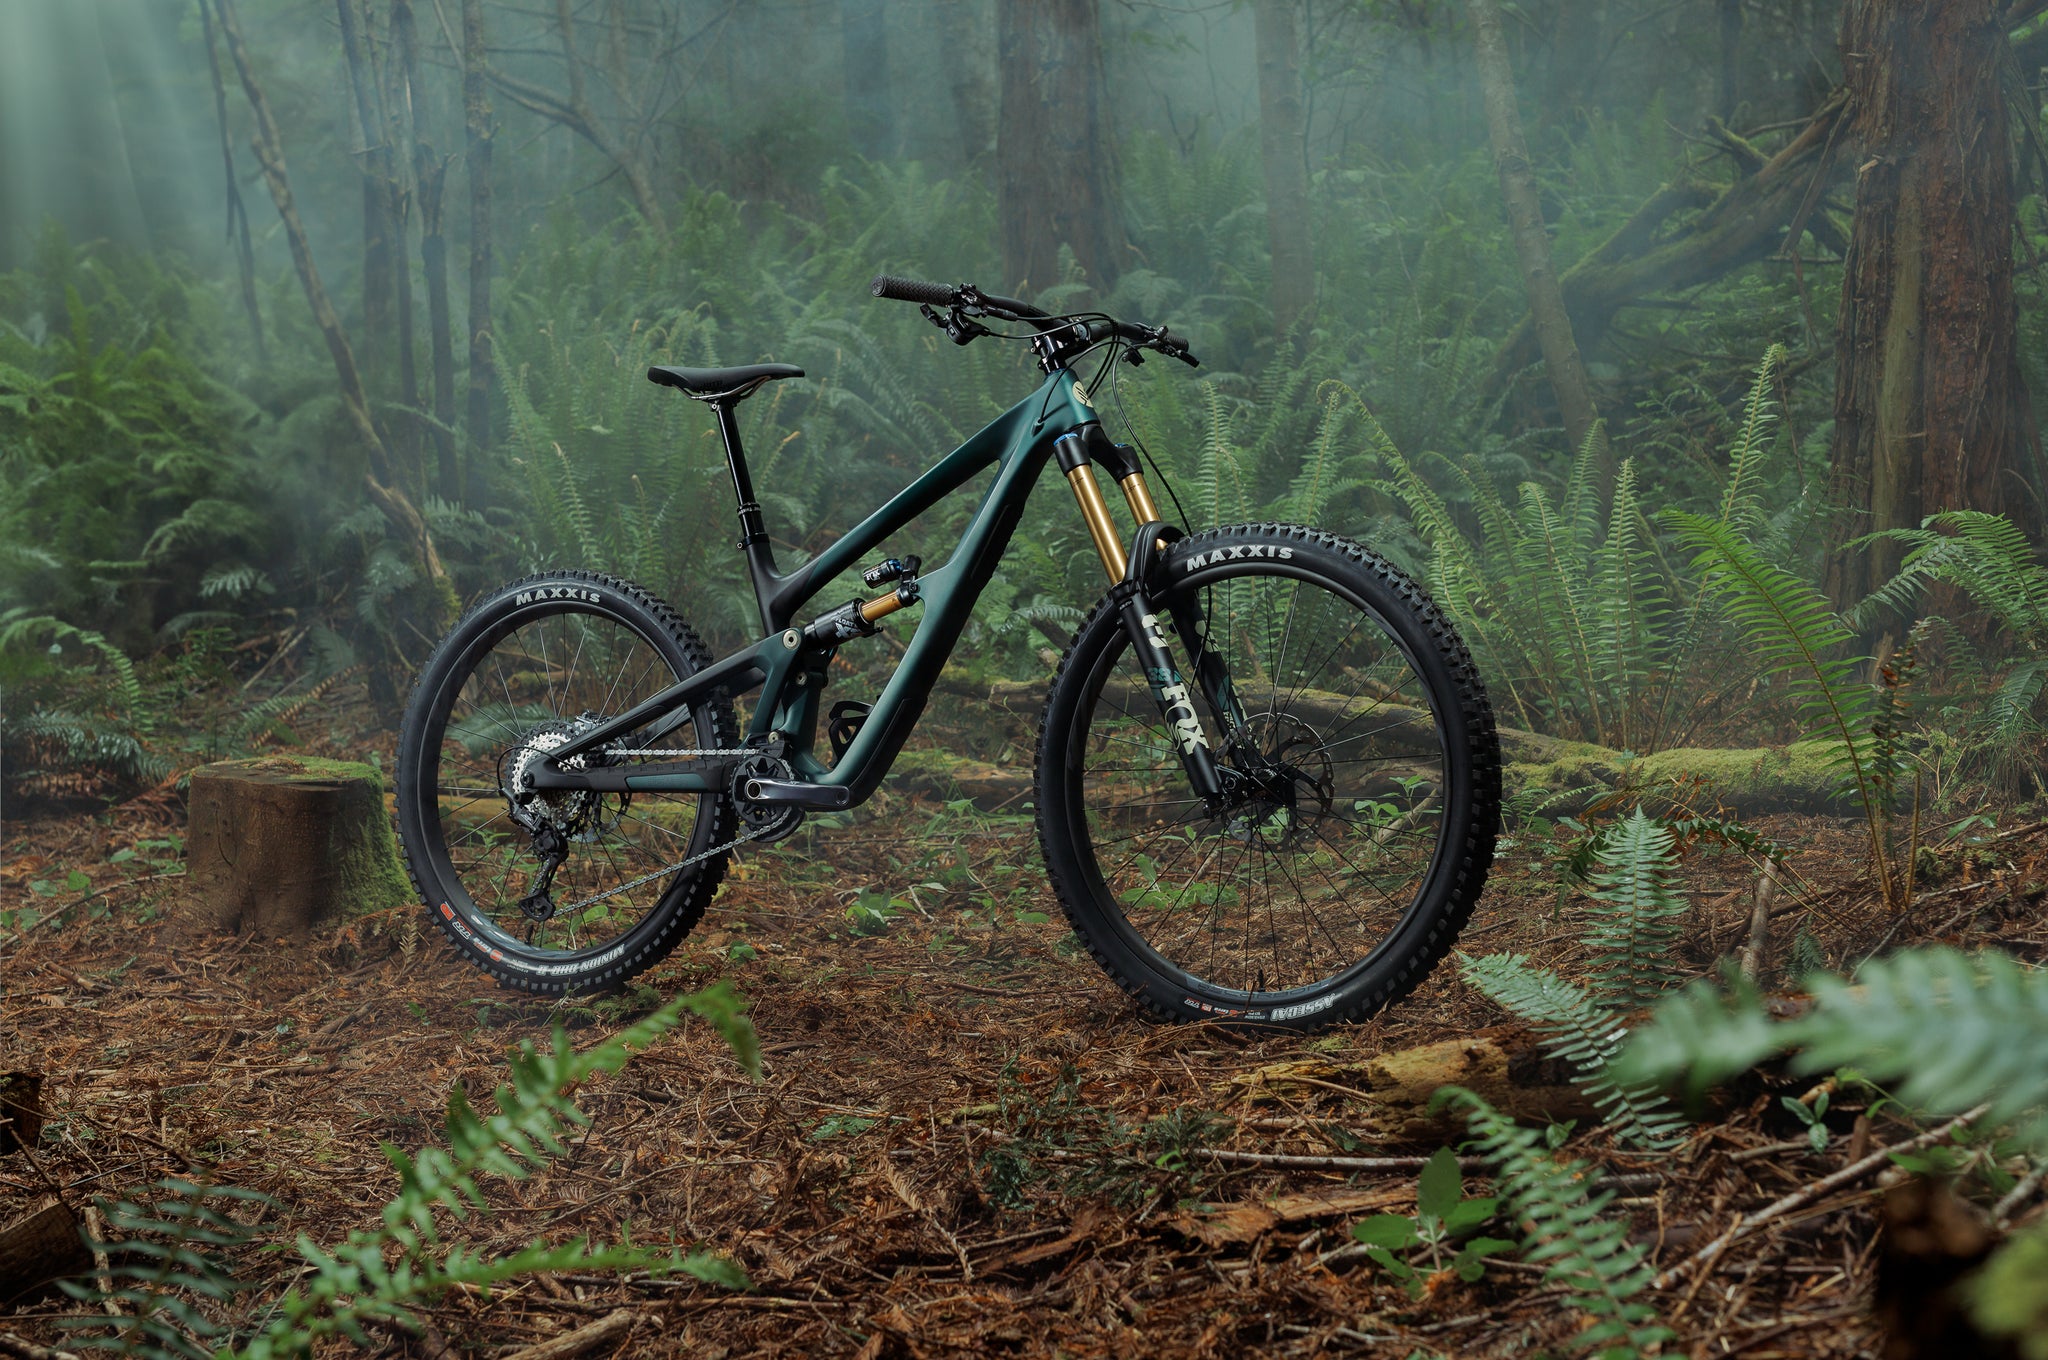 Tastes change, but we think the new Ibis HD6 looks incredible.